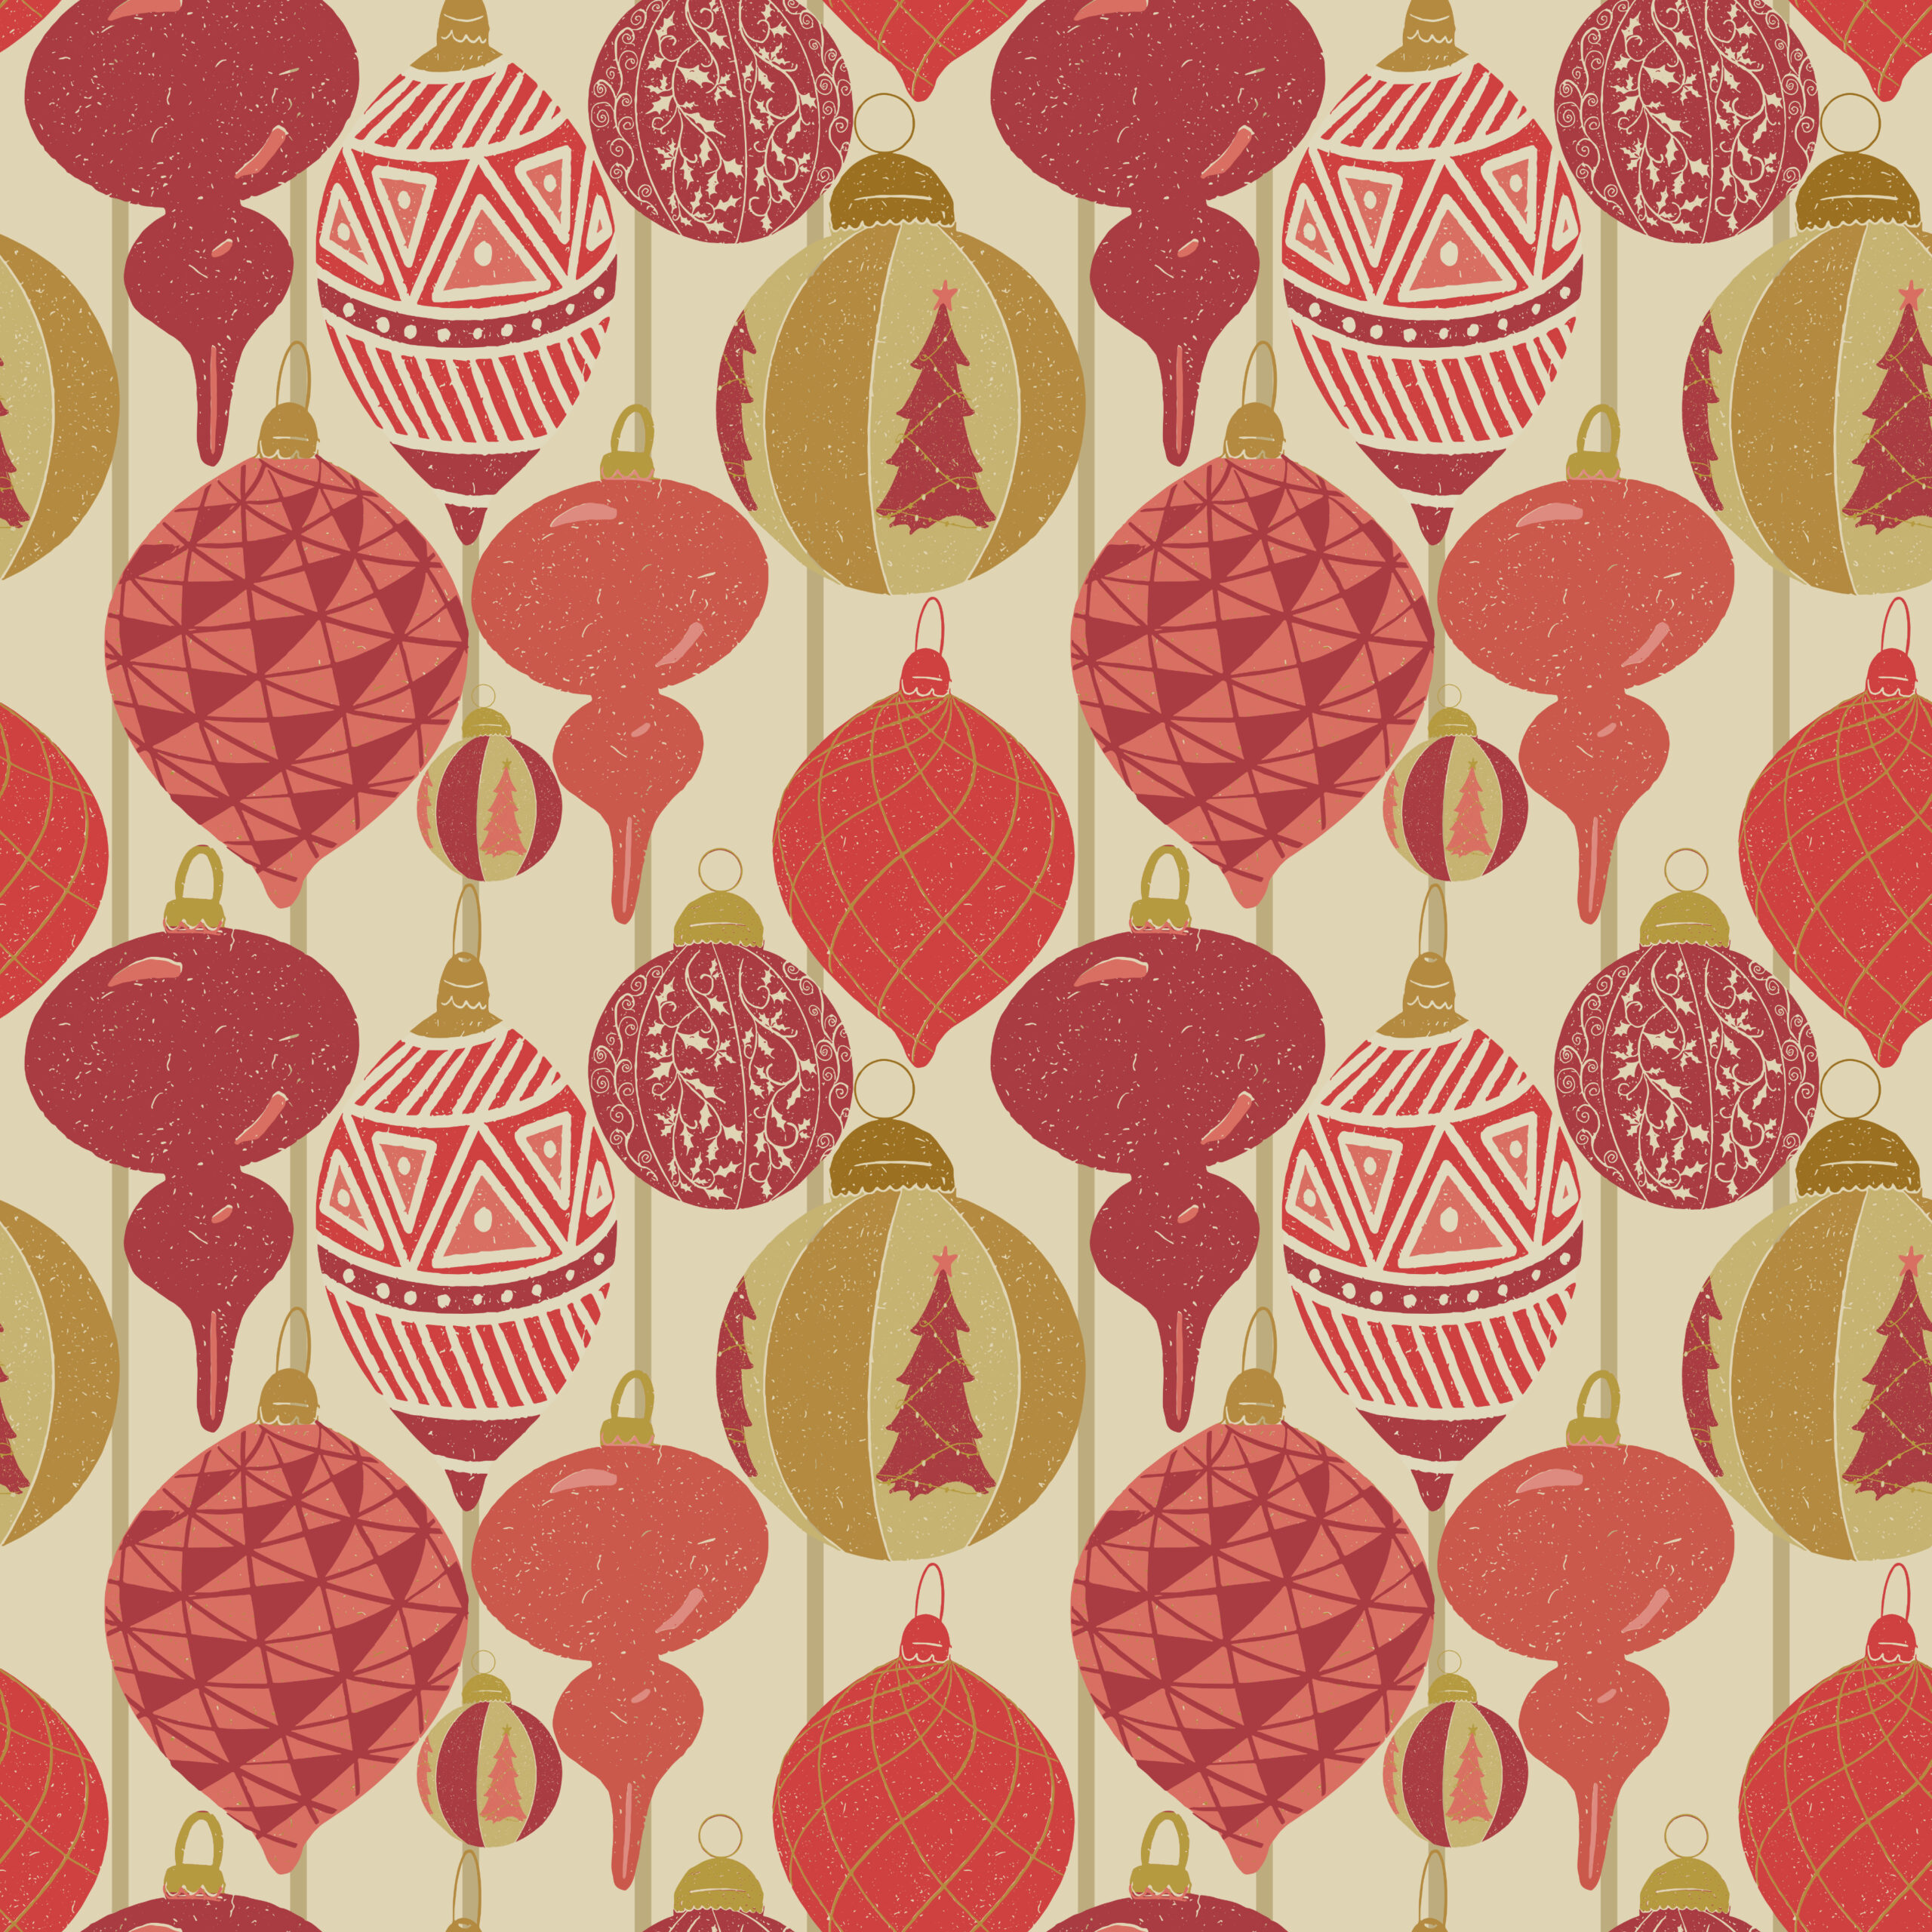 Repeating pattern of hanging decorative Christmas ornaments in red and gold.